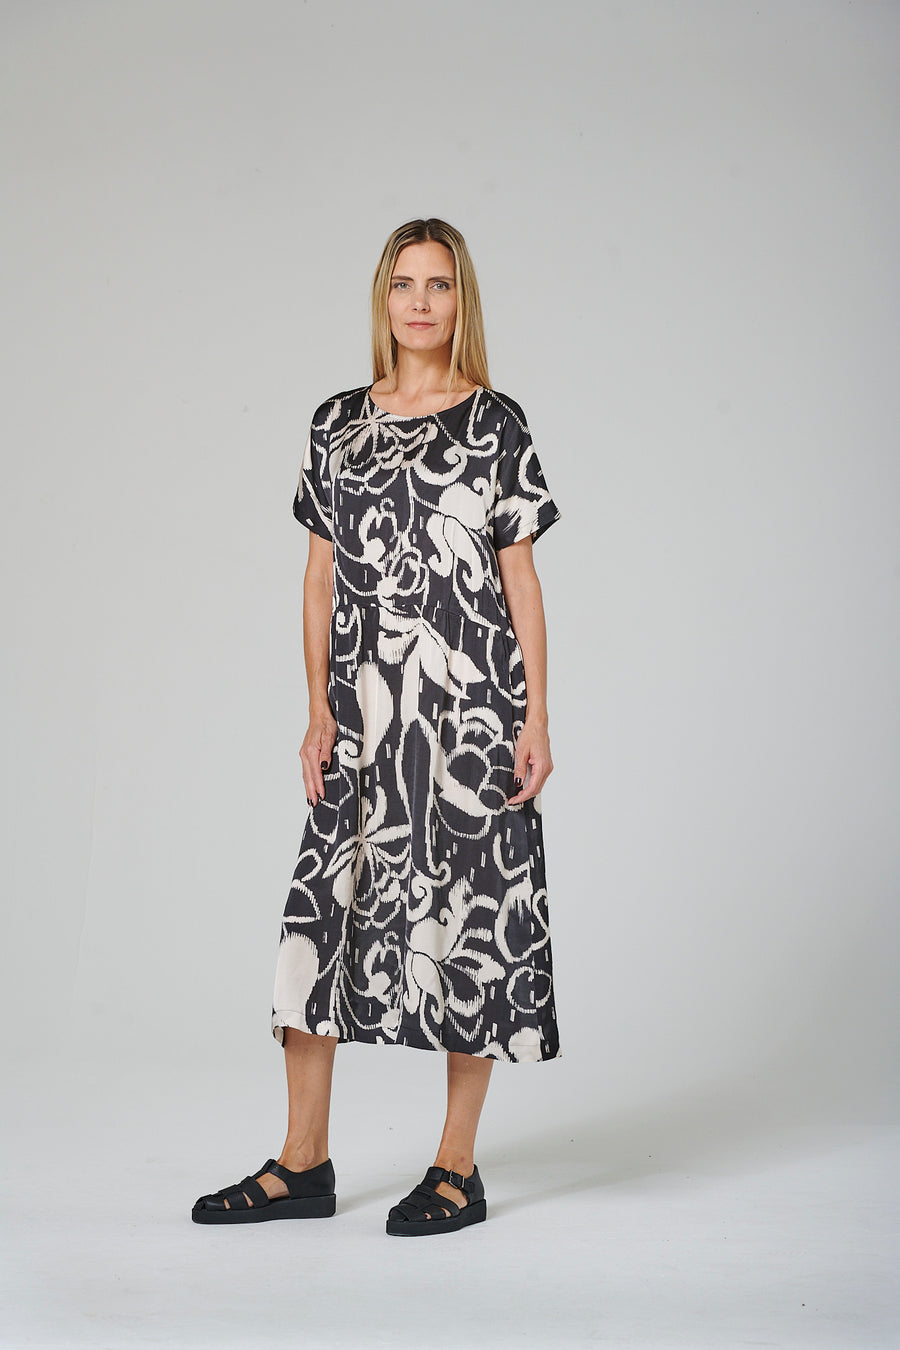 Dress made of printed viscose (330k1) in two print versions